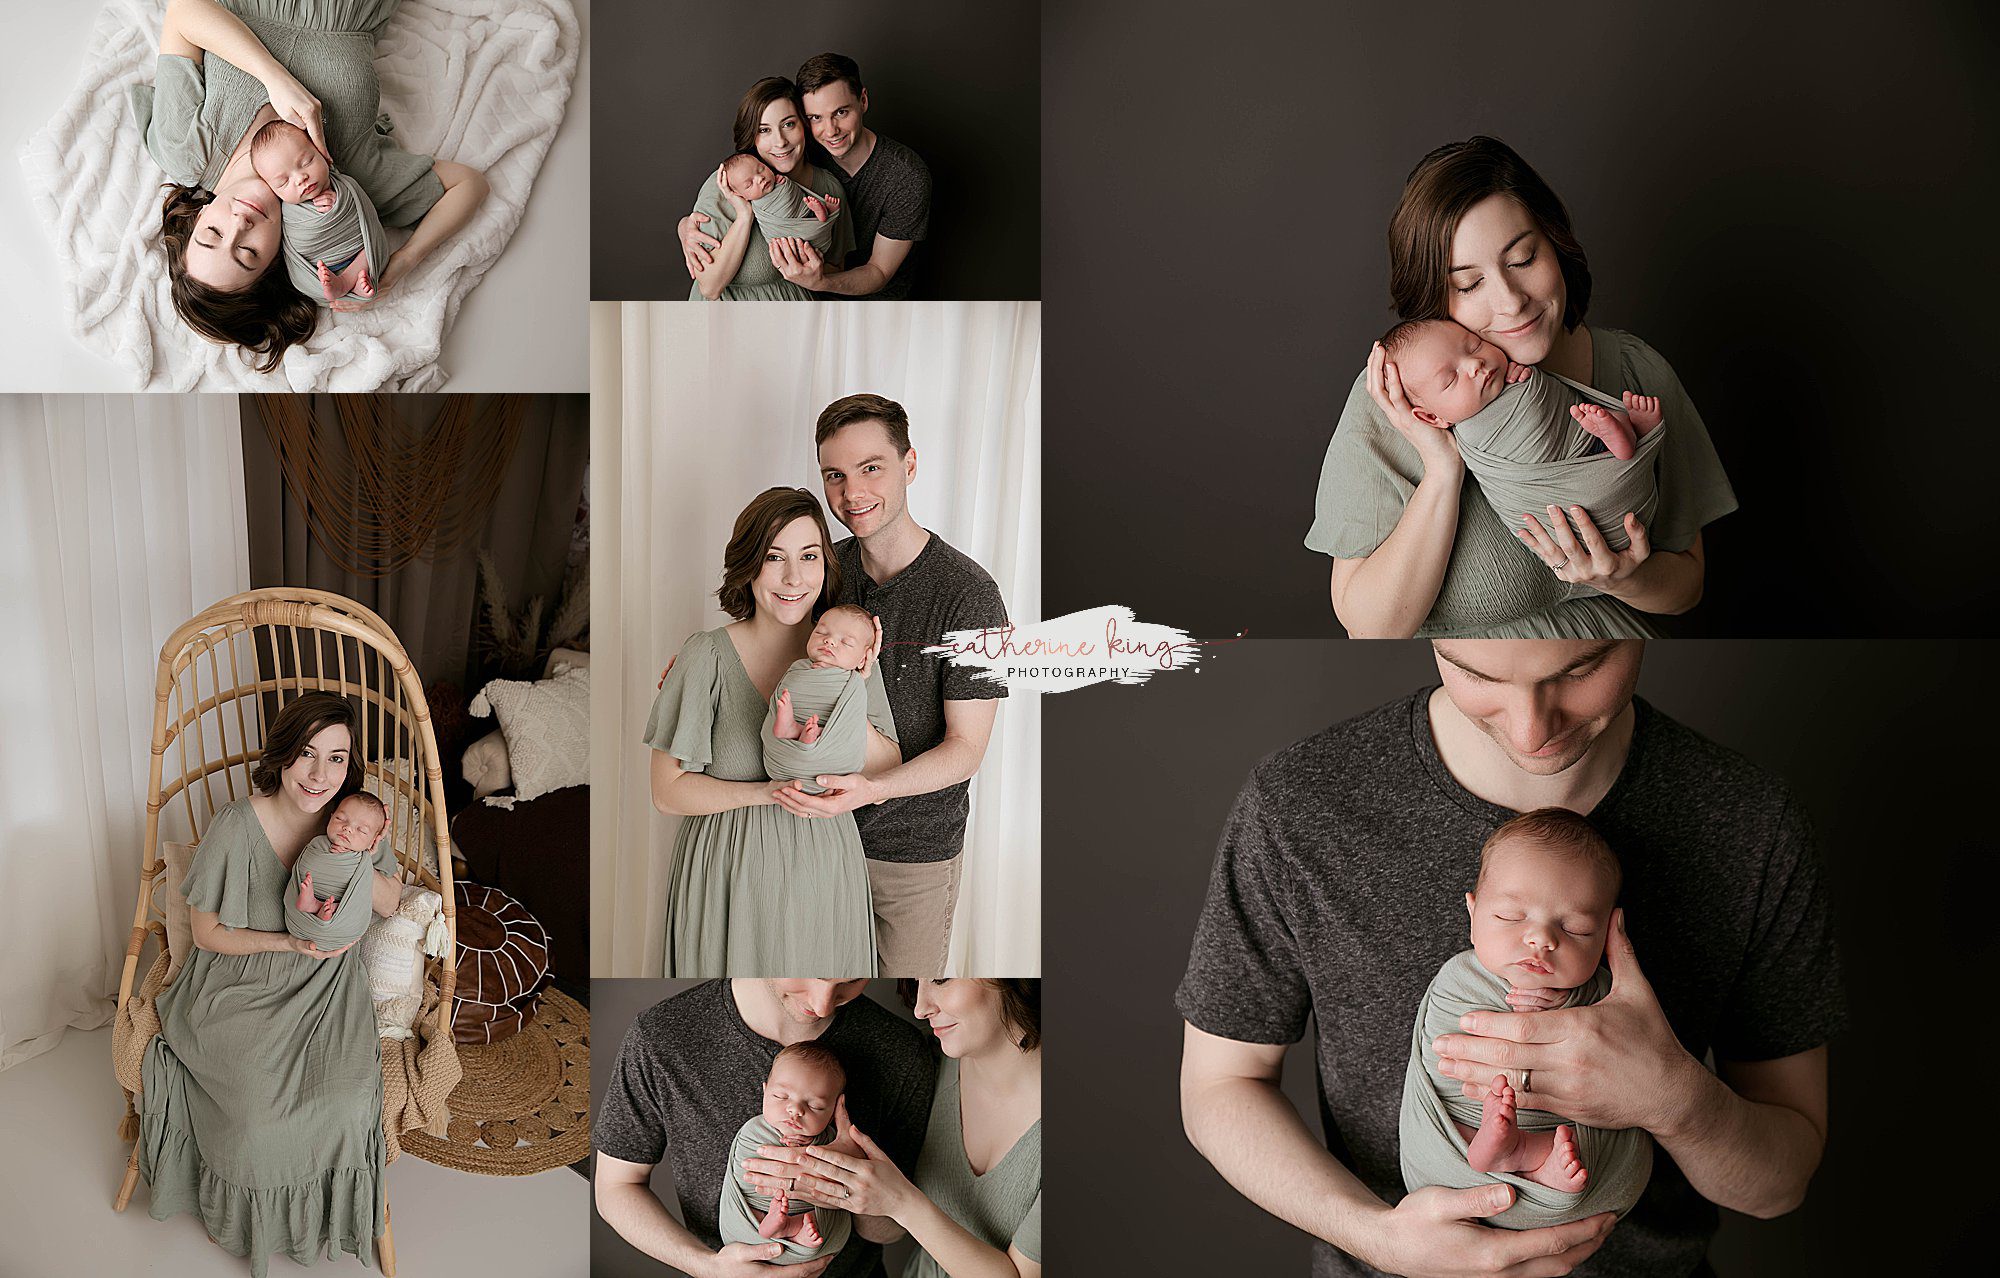 Tips for Planning a Stress-Free Newborn Photo Session in CT